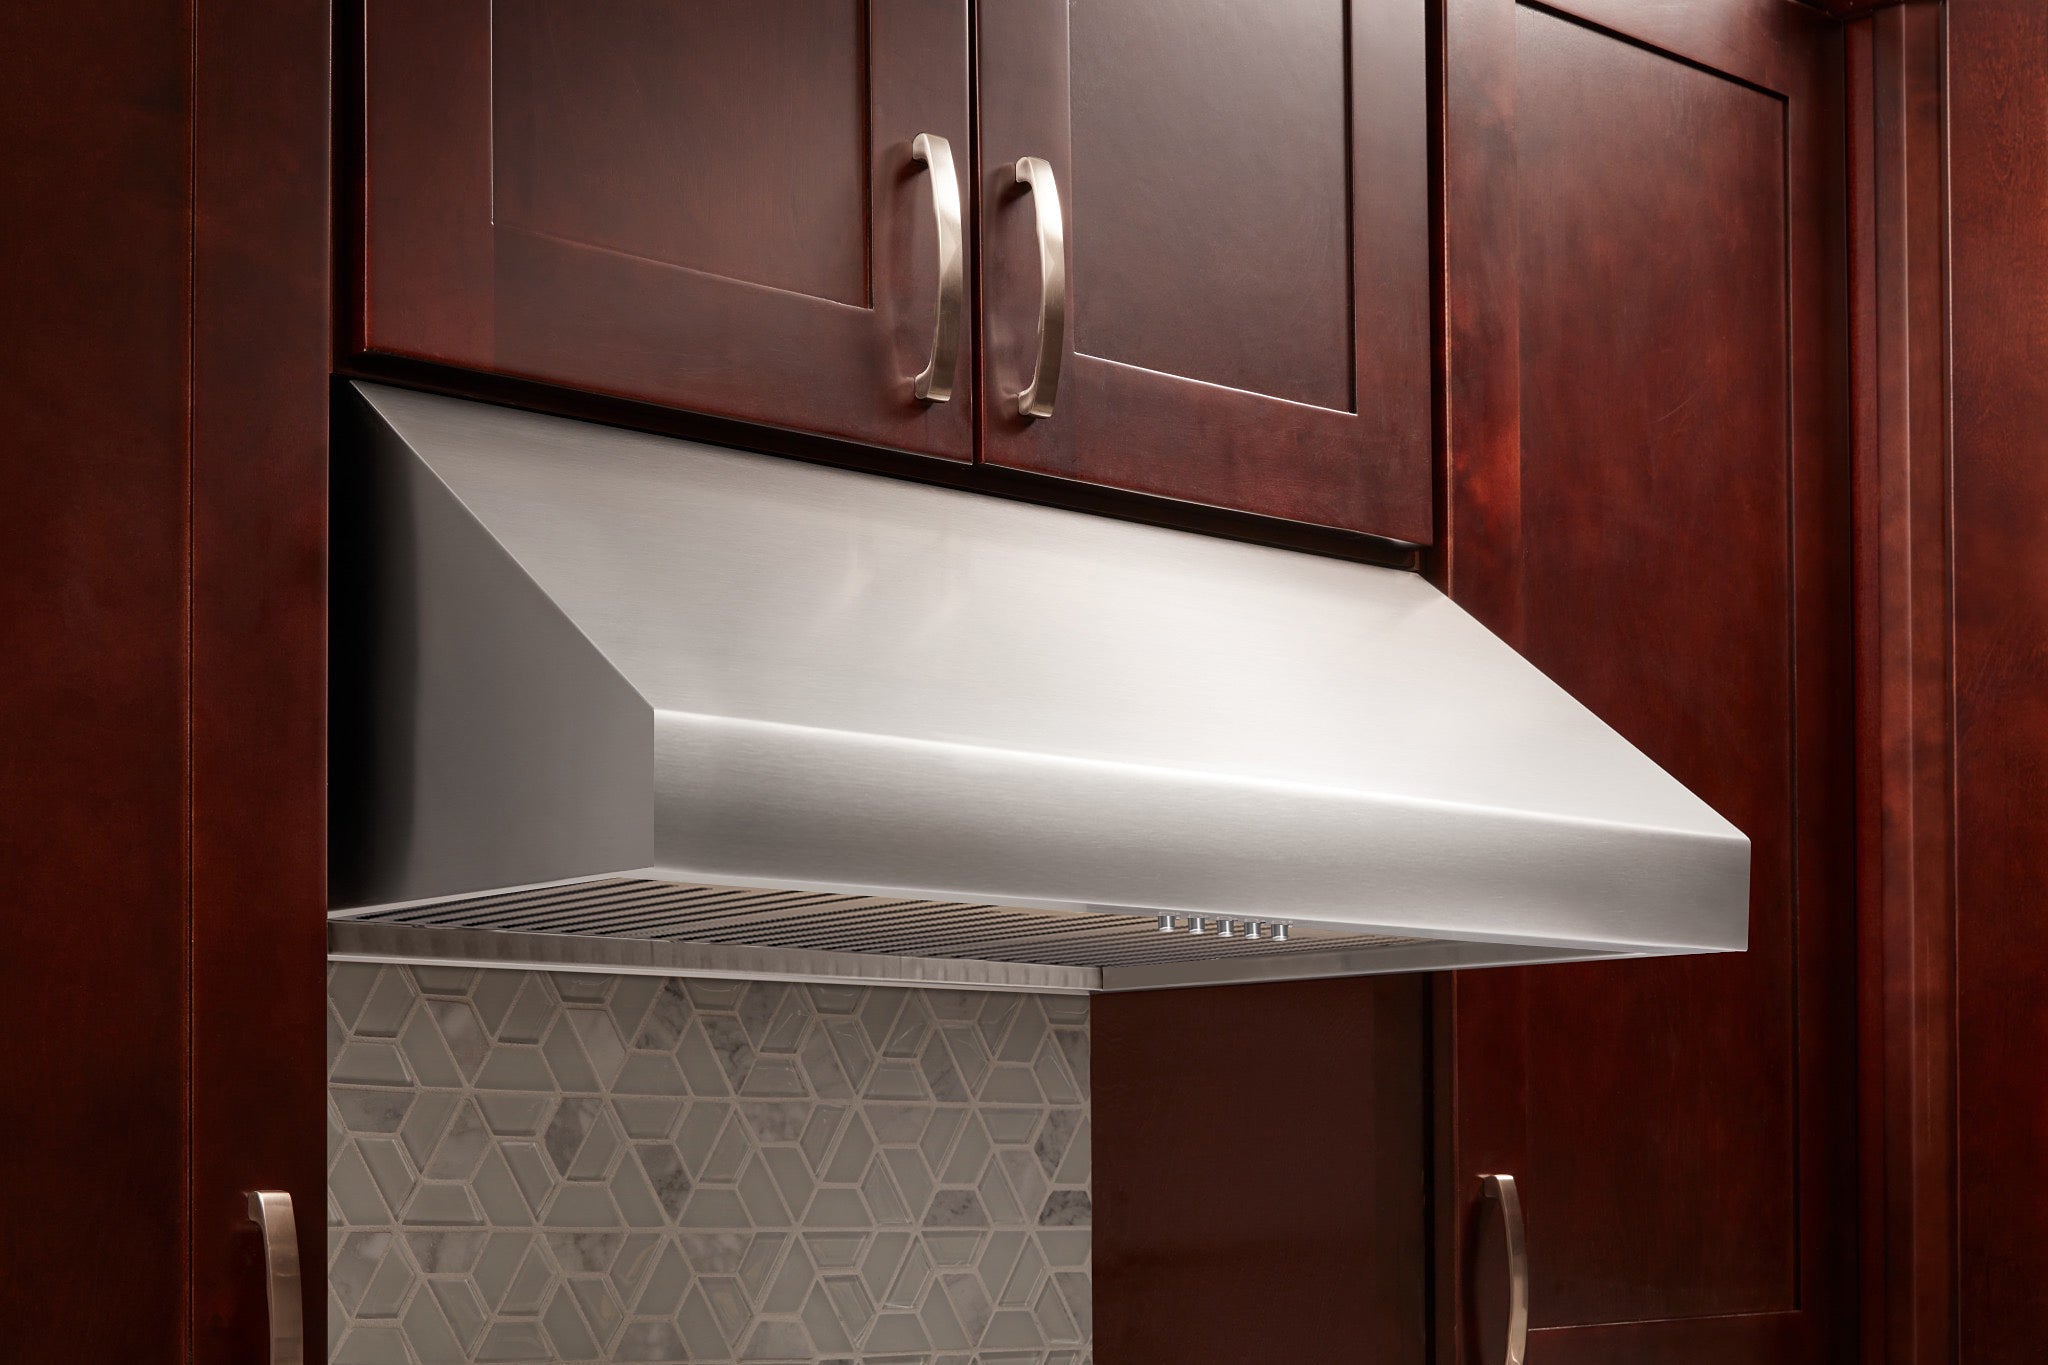 Thor Kitchen 30 Inch Professional Range Hood, 16.5 Inches Tall in Stainless Steel - Model TRH3005